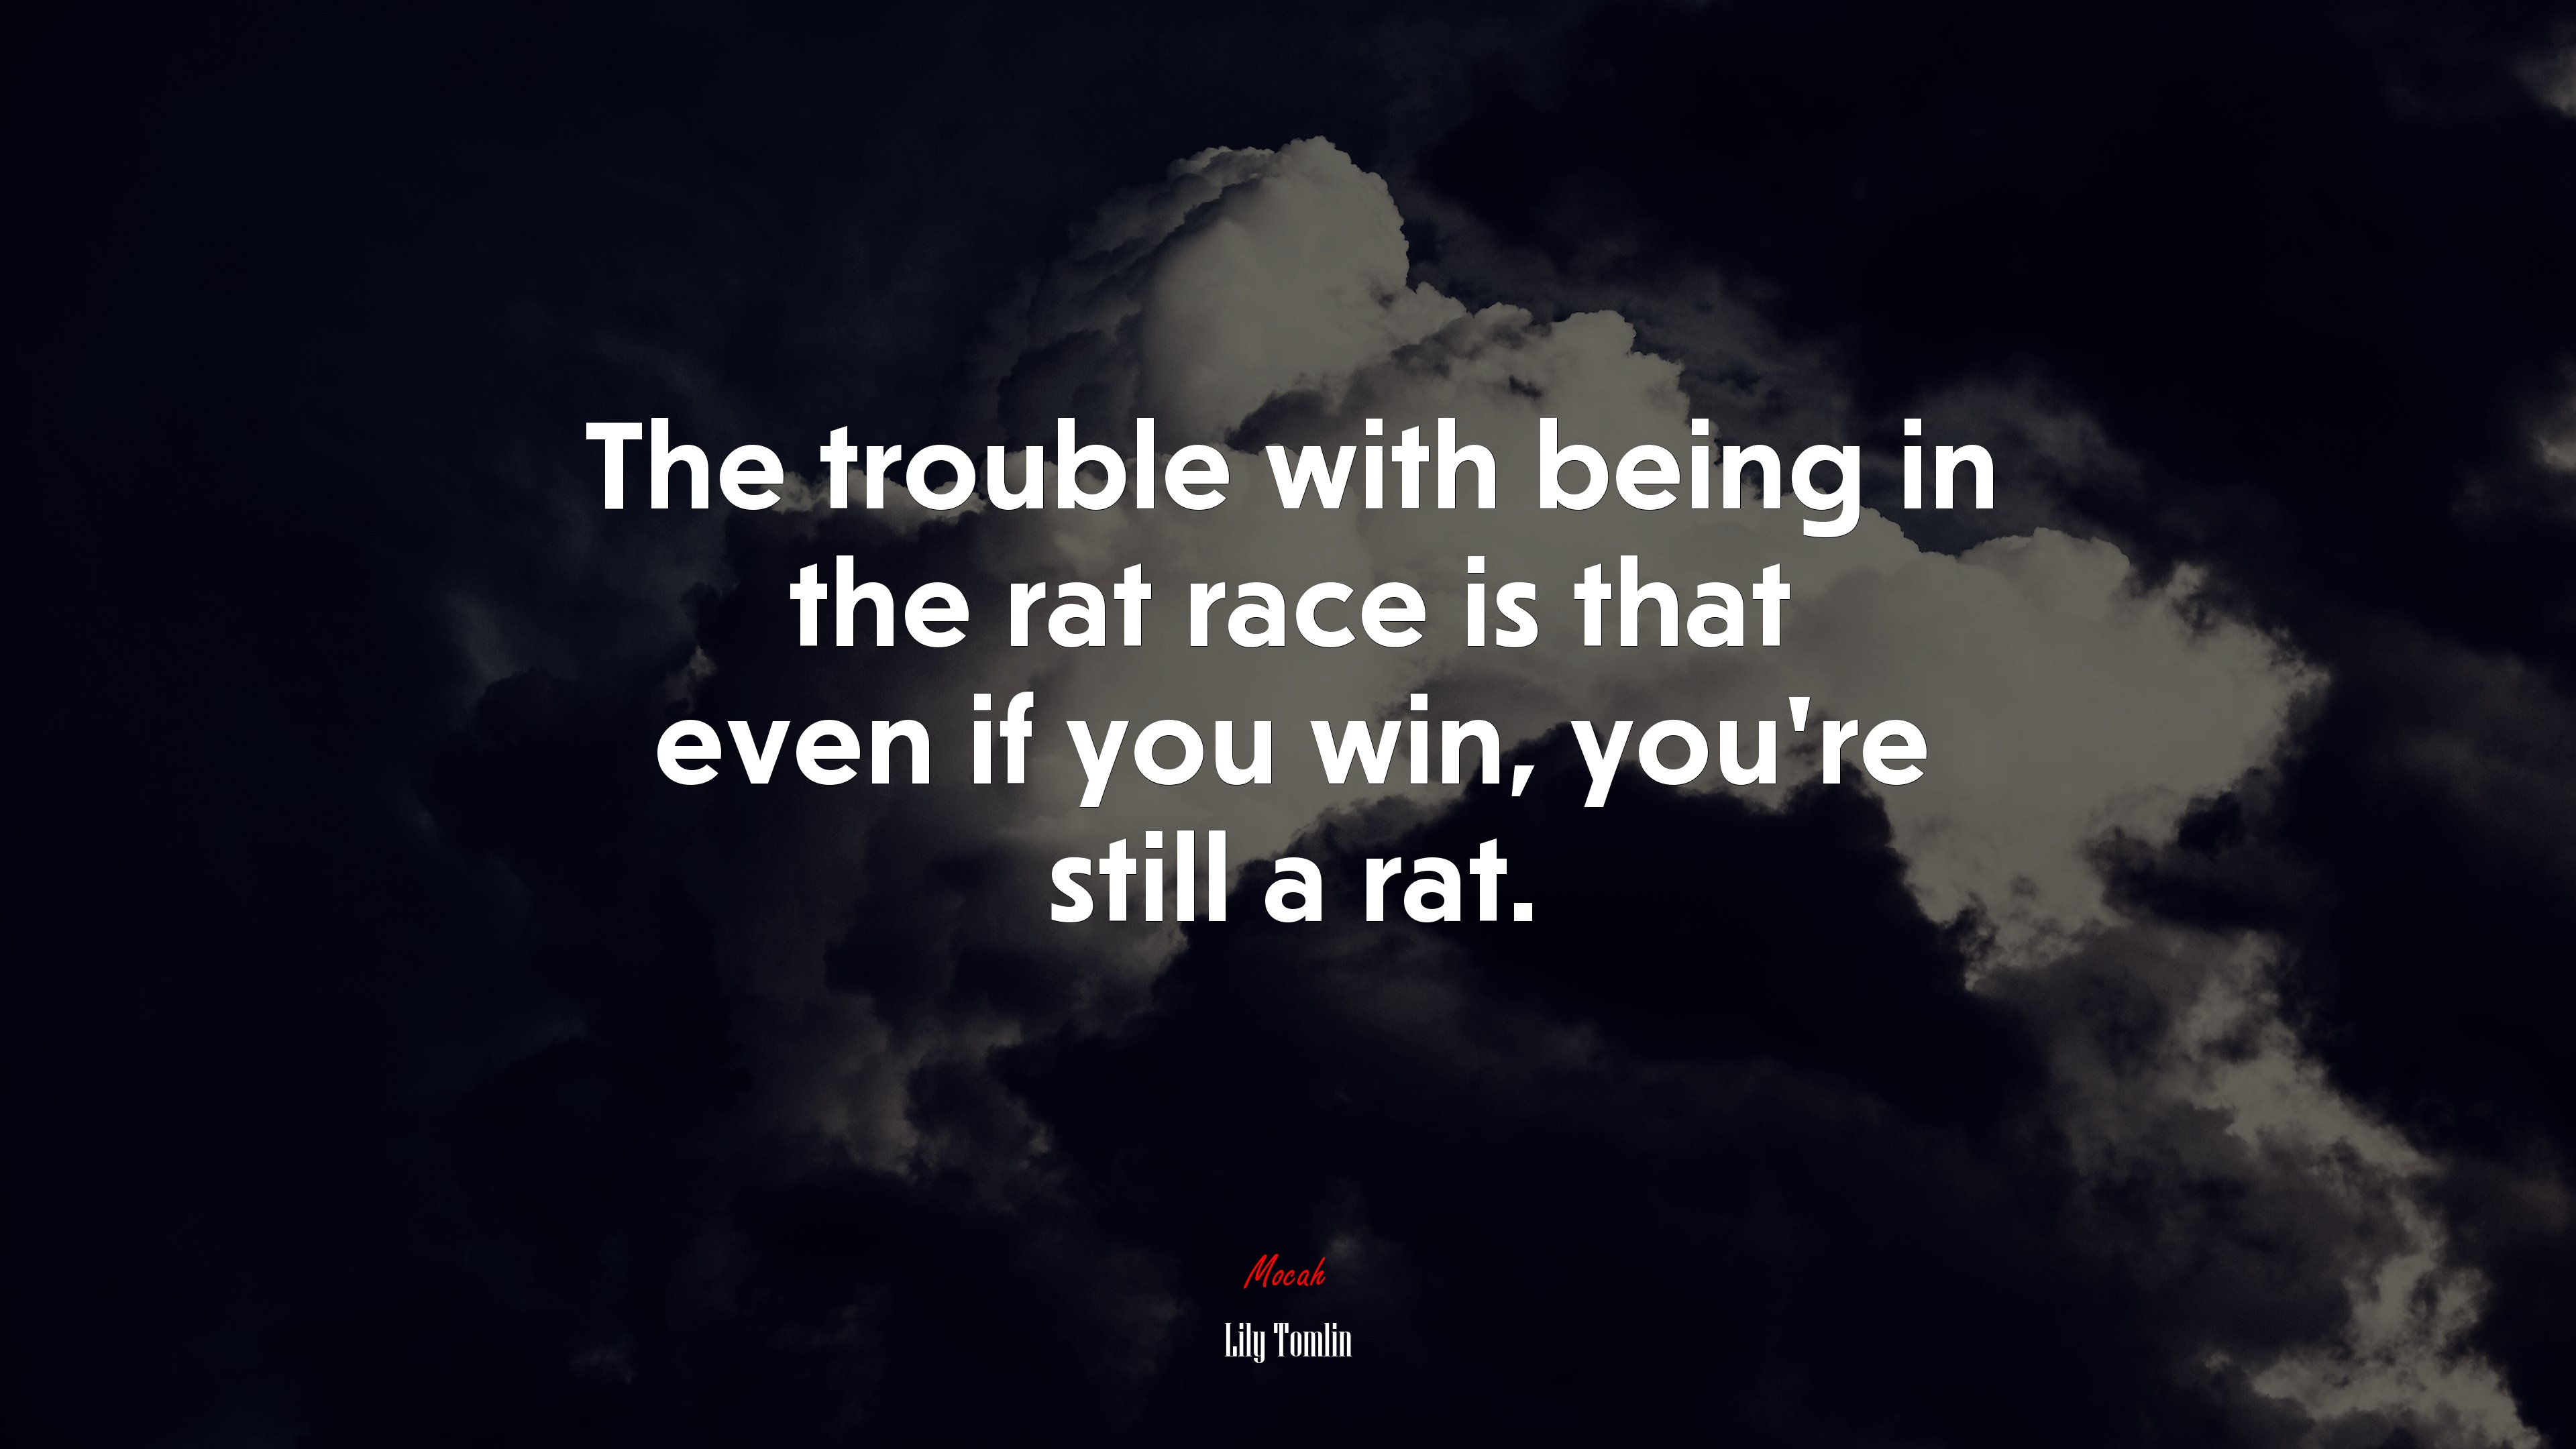 Only a rat can win a rat race. Michael Franti quote Gallery HD Wallpaper